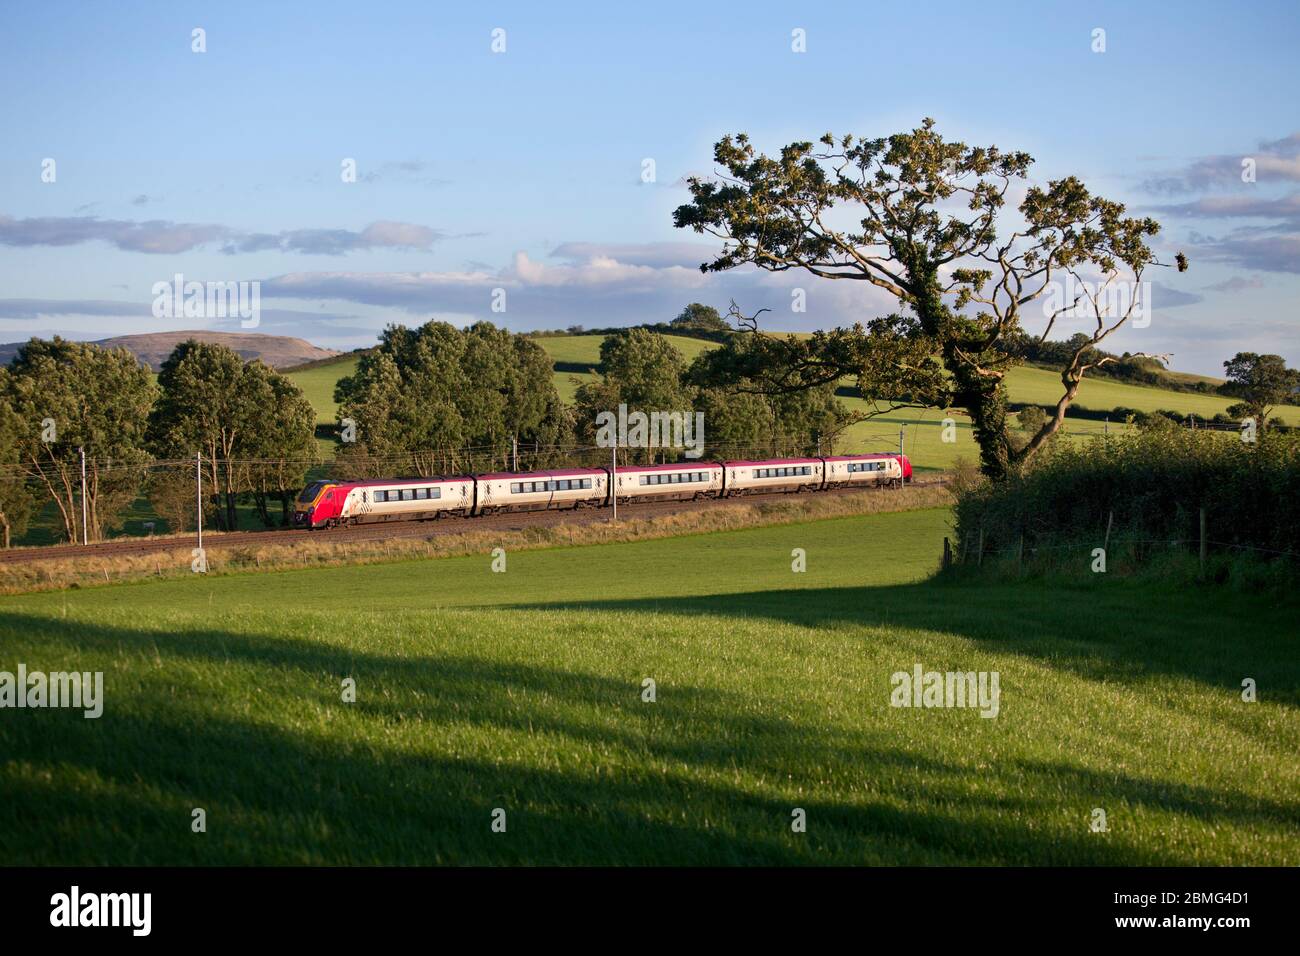 Virgin Trains Bombardier class 221 diesel voyager train in the countryside on the electrified west coast mainline in Cumbria. Stock Photo